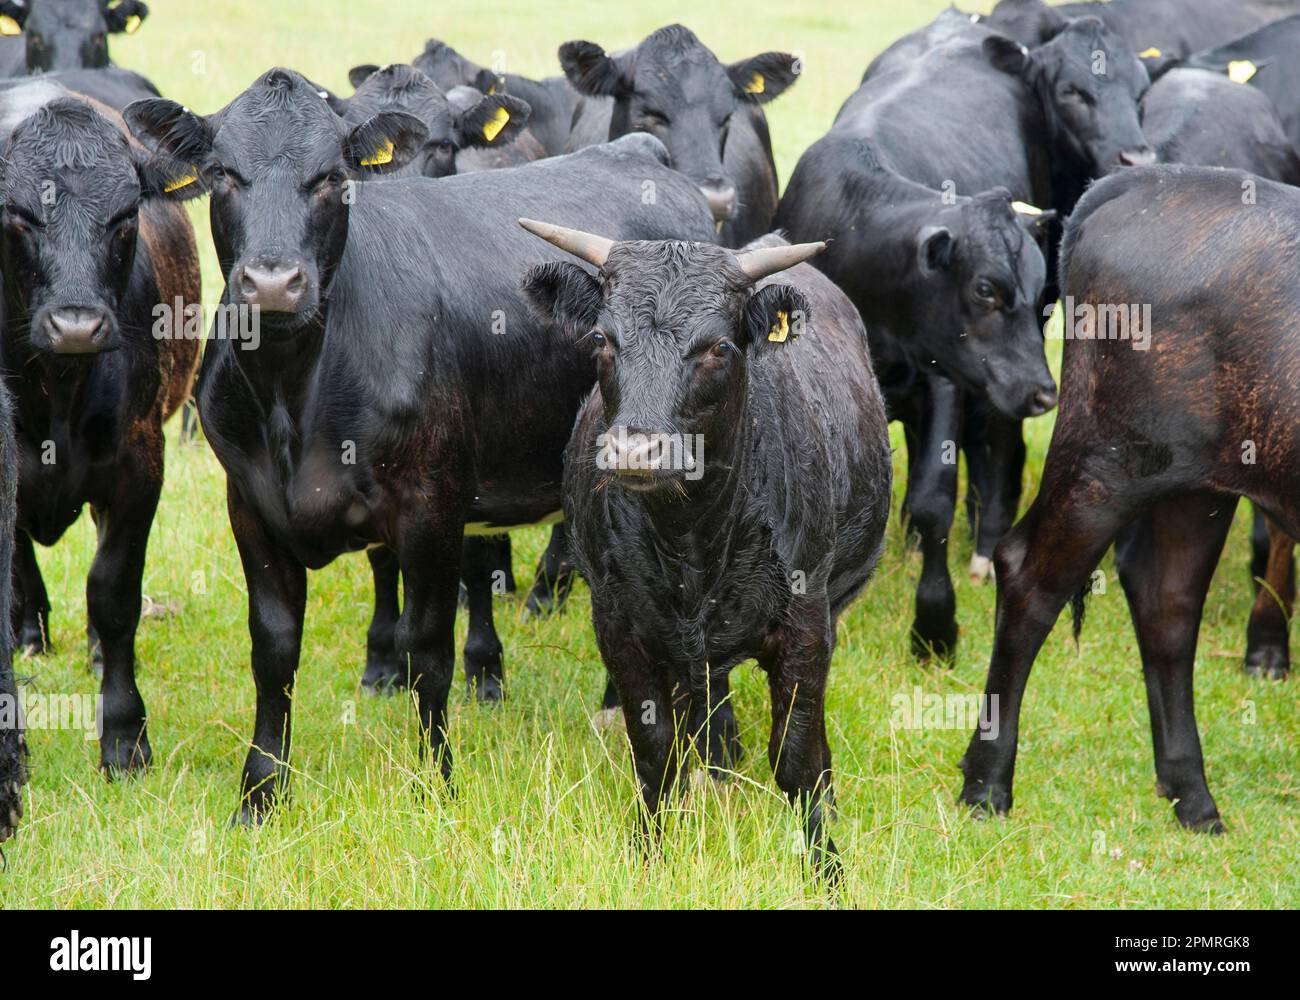 Domestic cattle, Dexter cattle herd, standing on pasture, Bradford, West Yorkshire, England, United Kingdom Stock Photo